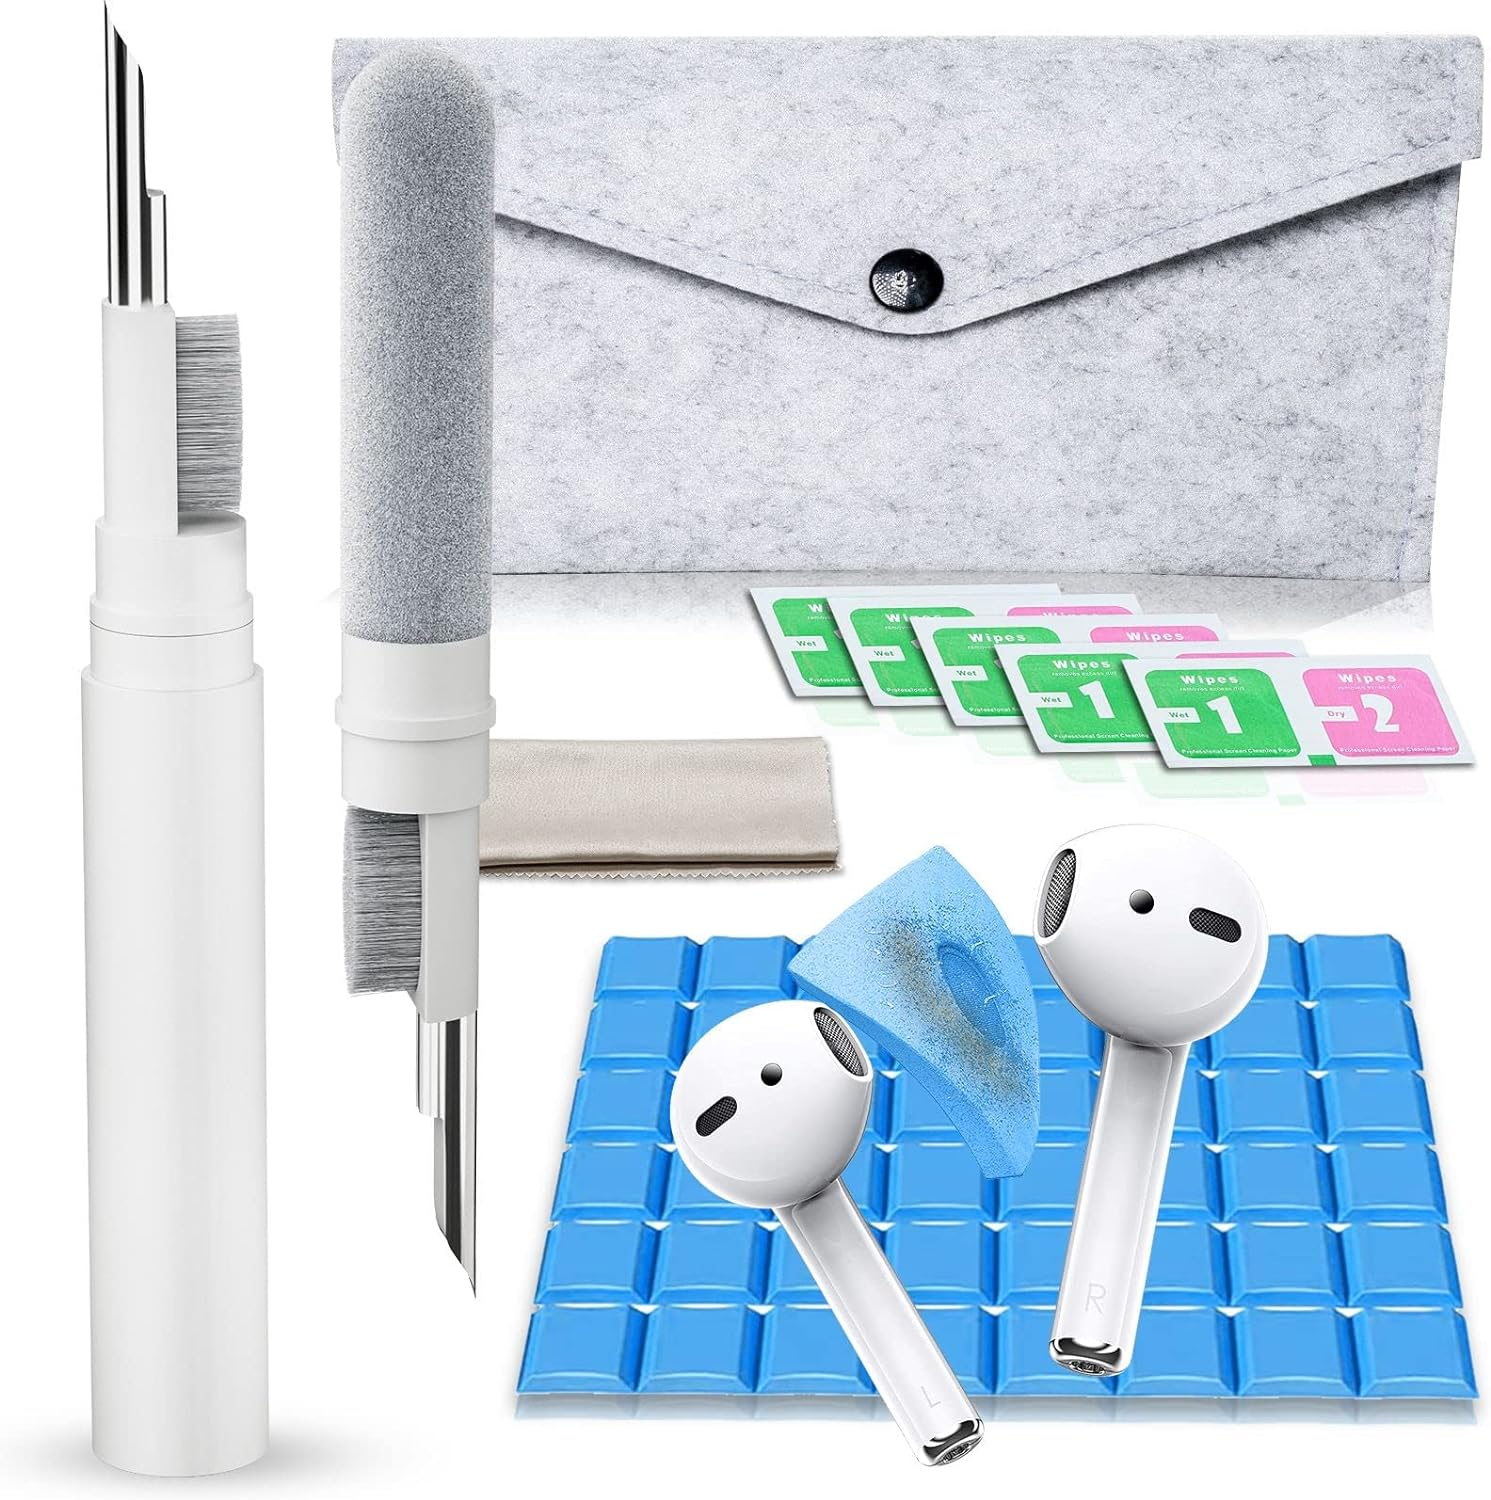 Cleaner Kit for Airpods, Earbuds Cleaning kit for Airpods Pro 1 2 3, Phone Cleaner kit with Brush for Bluetooth Earbuds Cleaner, Wireless Earphones,iPhone,Laptop, Camera (White)